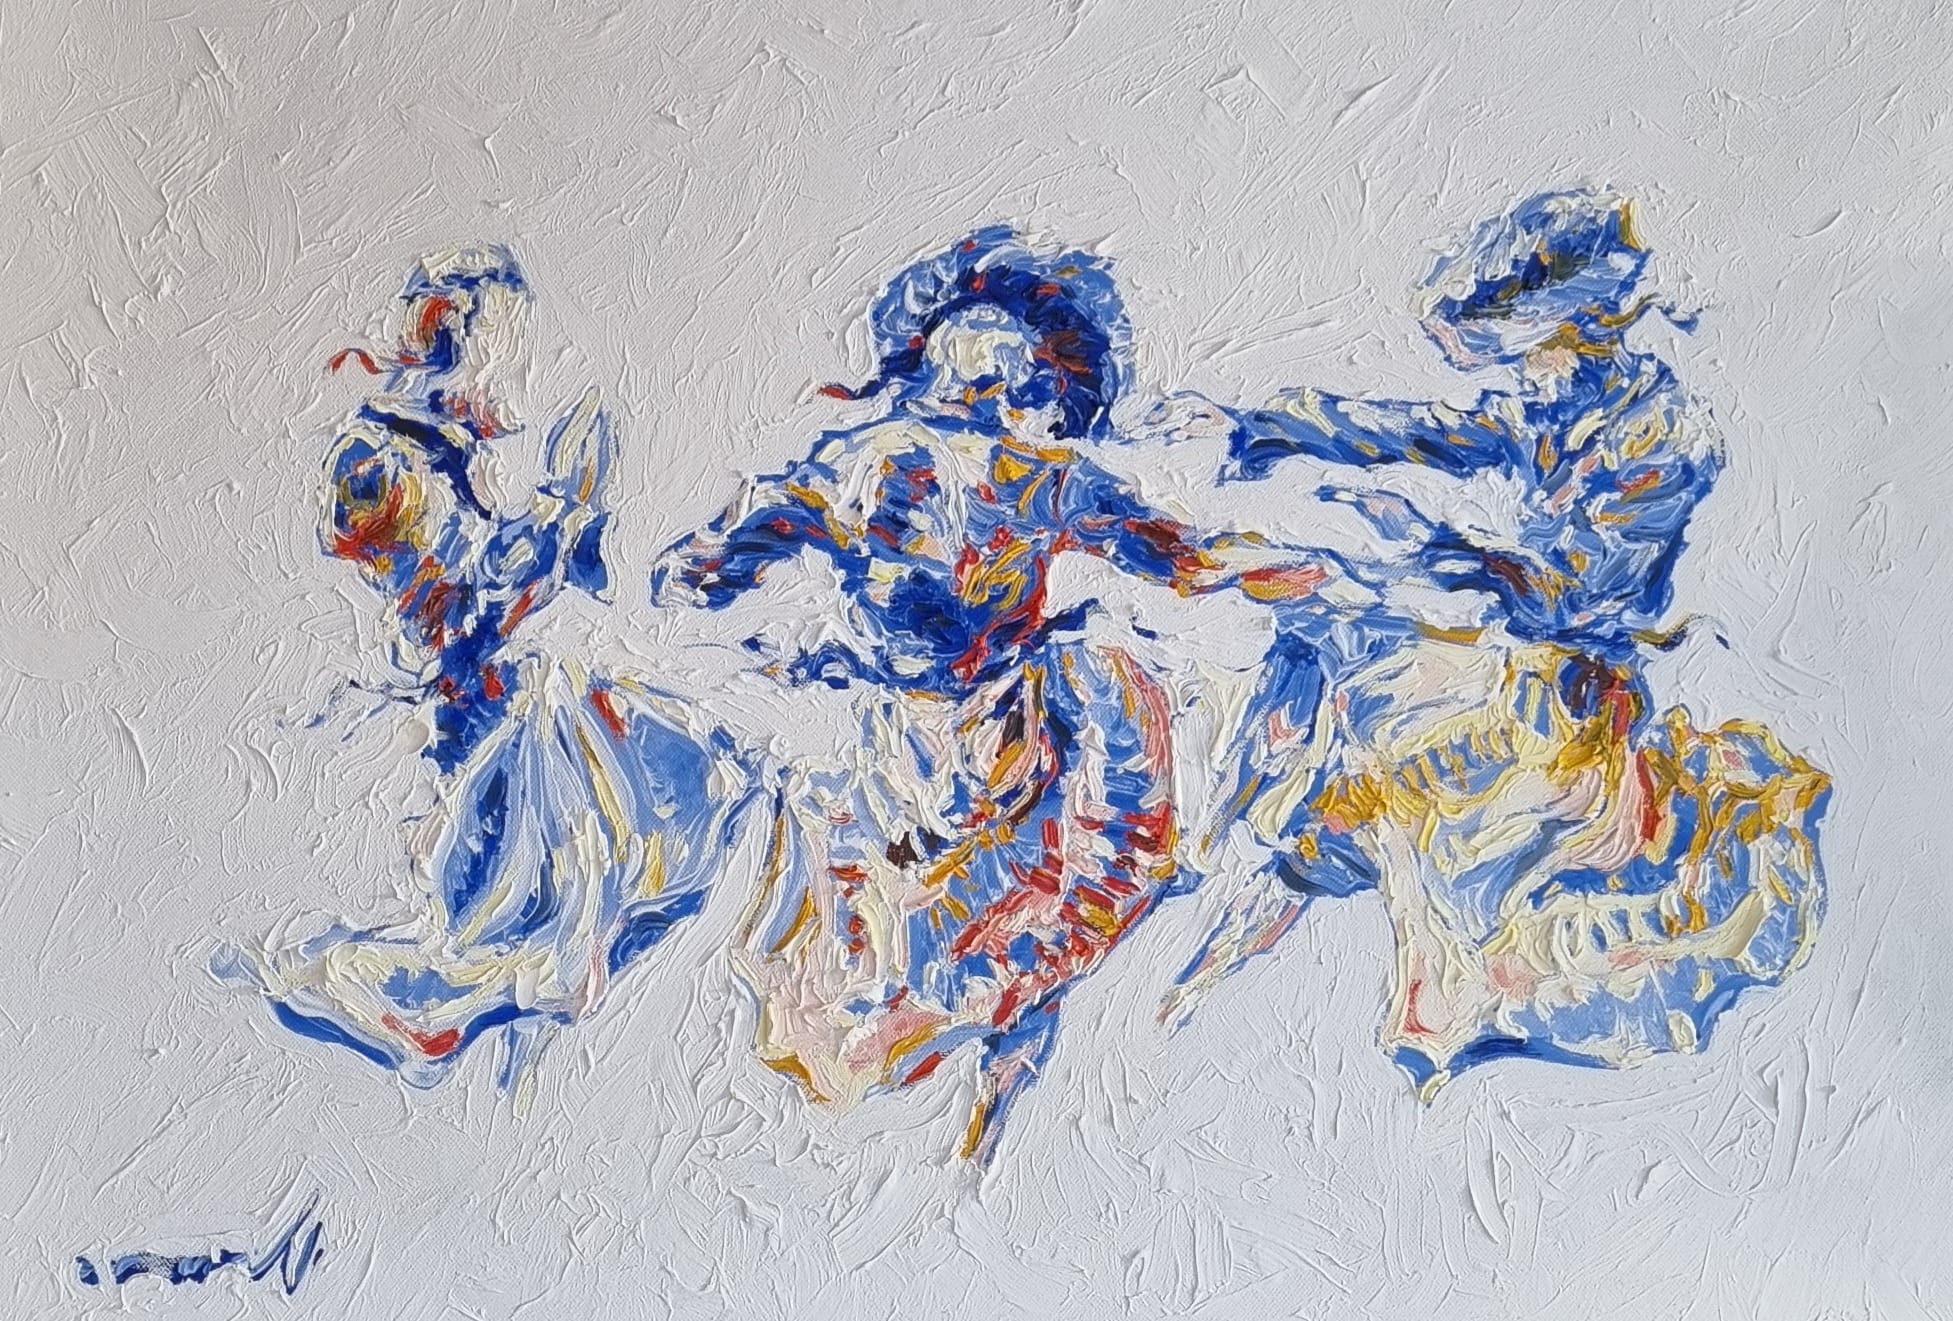 Yossef Douer - Chassidic dancing in pastel - Oil on canvas - 70x50 cm